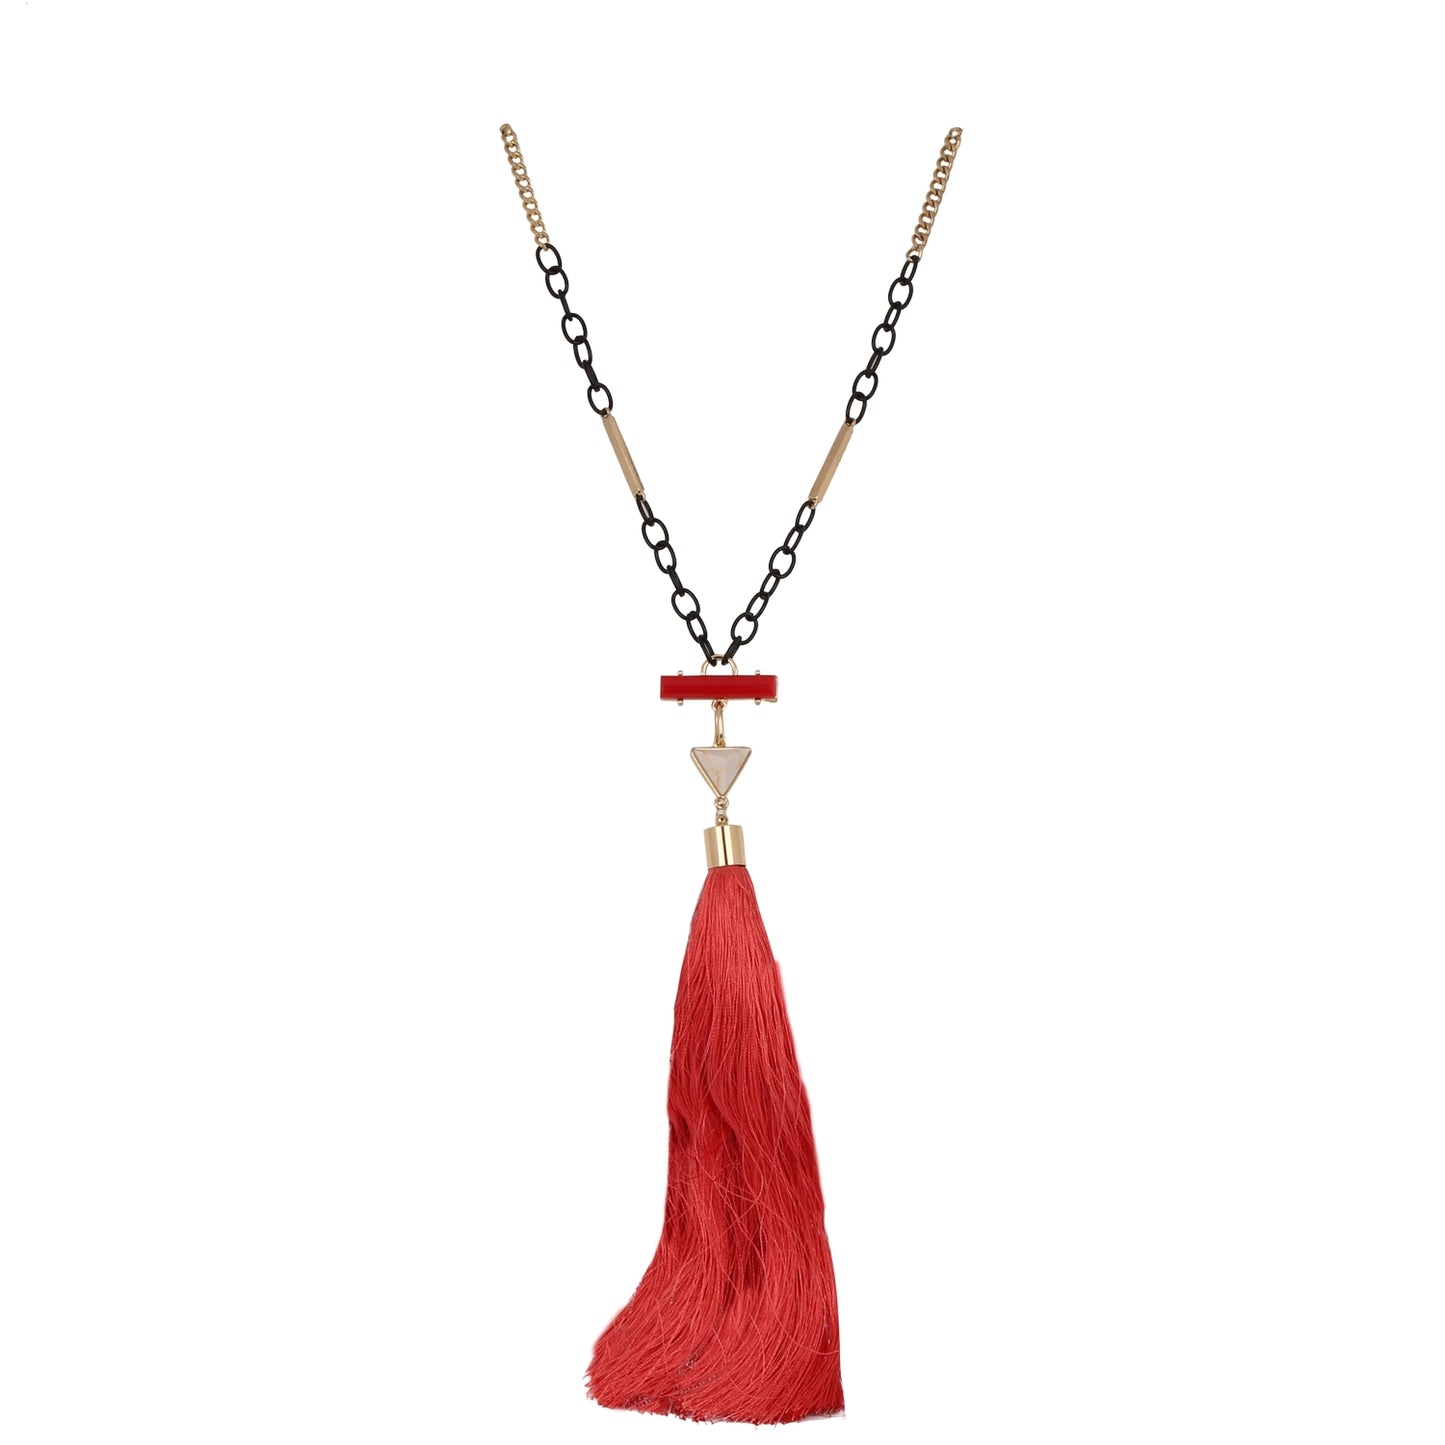 LONG PENDENT STYLE WITH PEACH TUSSEL JEWELERY - Coral Tree 